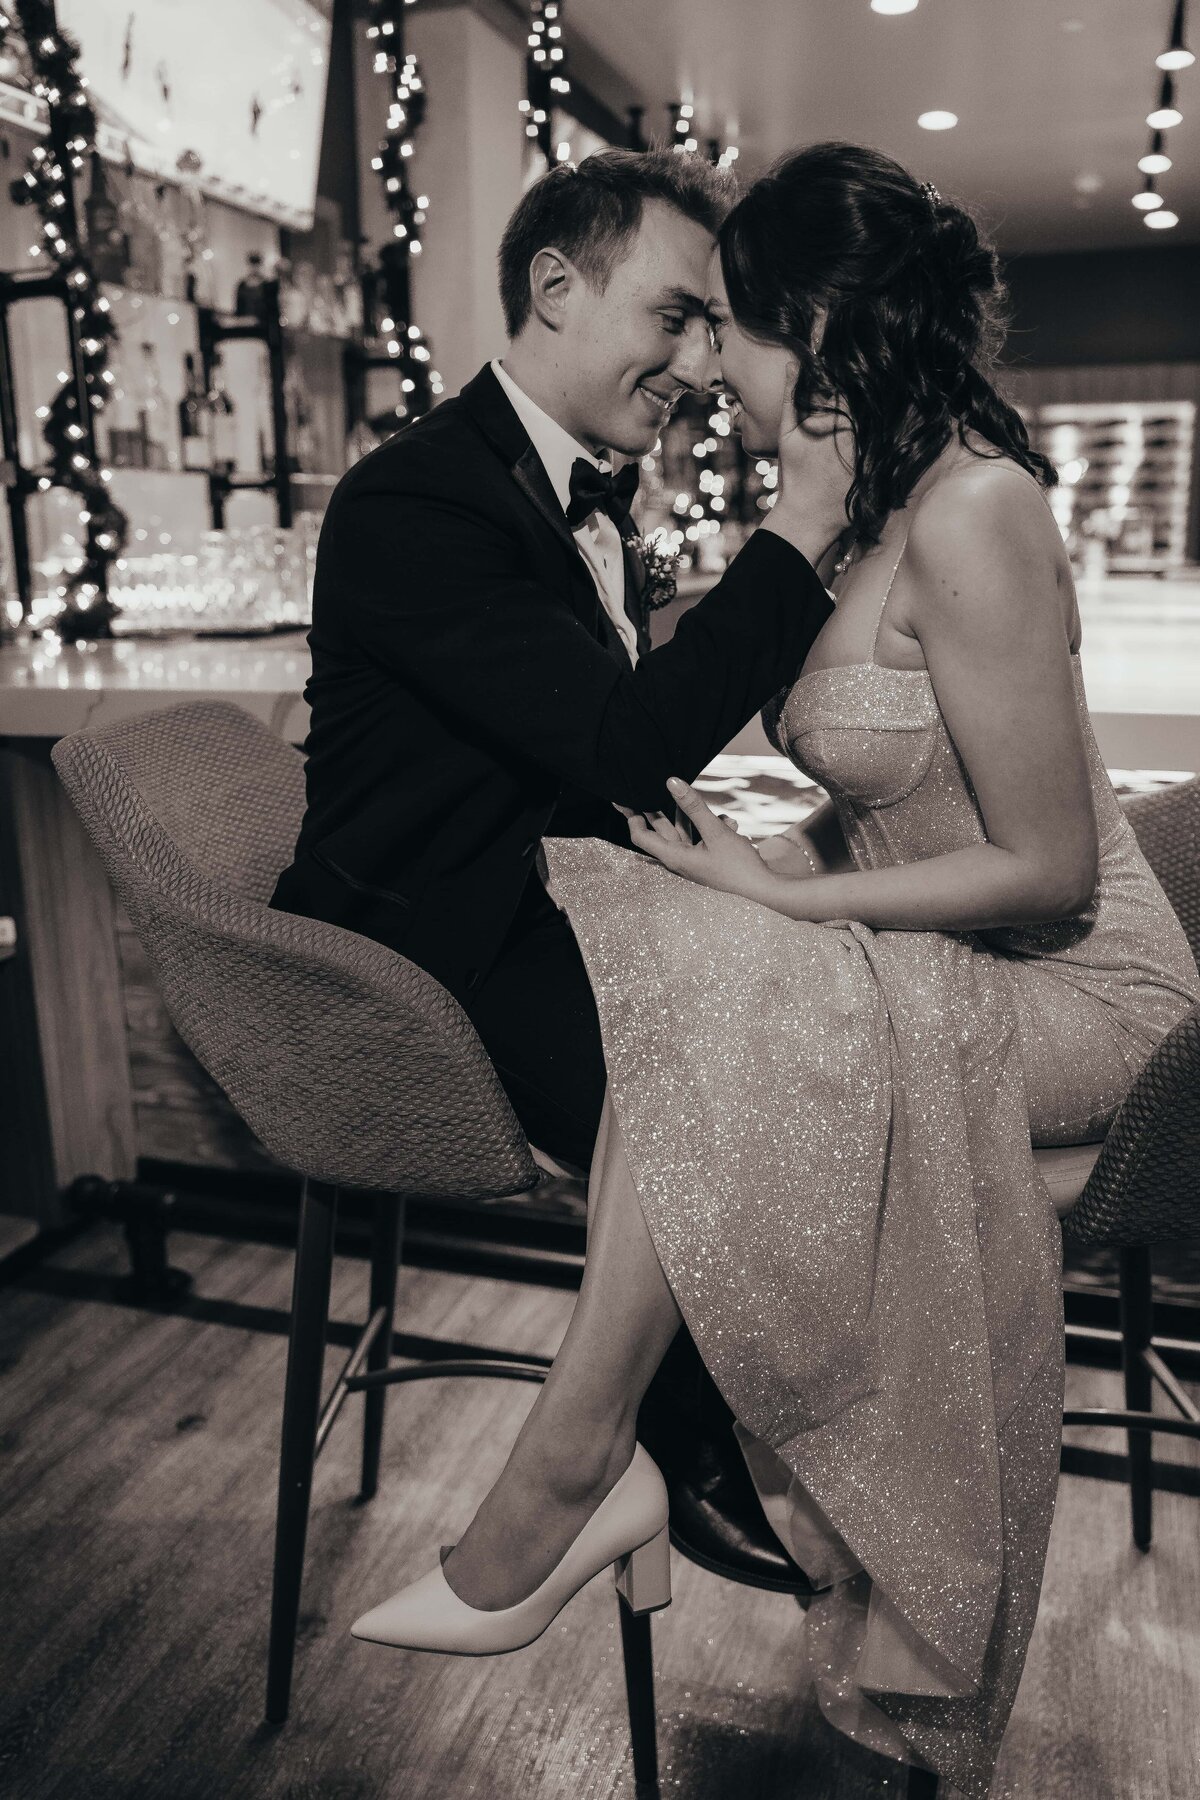 A romantic black and white photo of a couple in formal attire touching foreheads and smiling, sitting at a bar decorated with Christmas lights during an Iowa wedding.